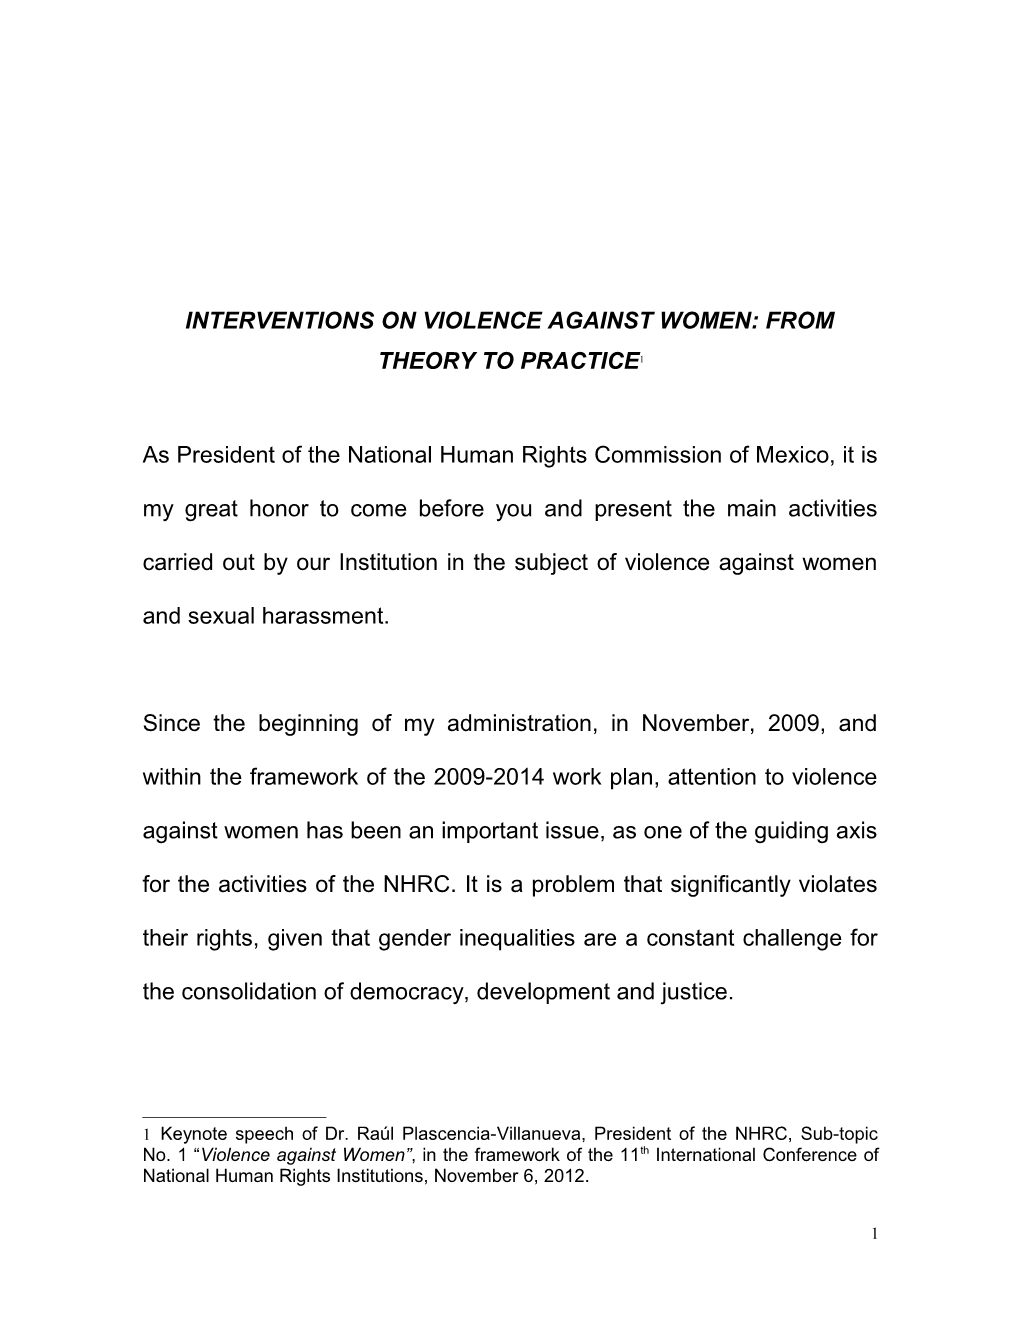 Interventions on Violence Against Woman - from Theory to Practice (Mexico)